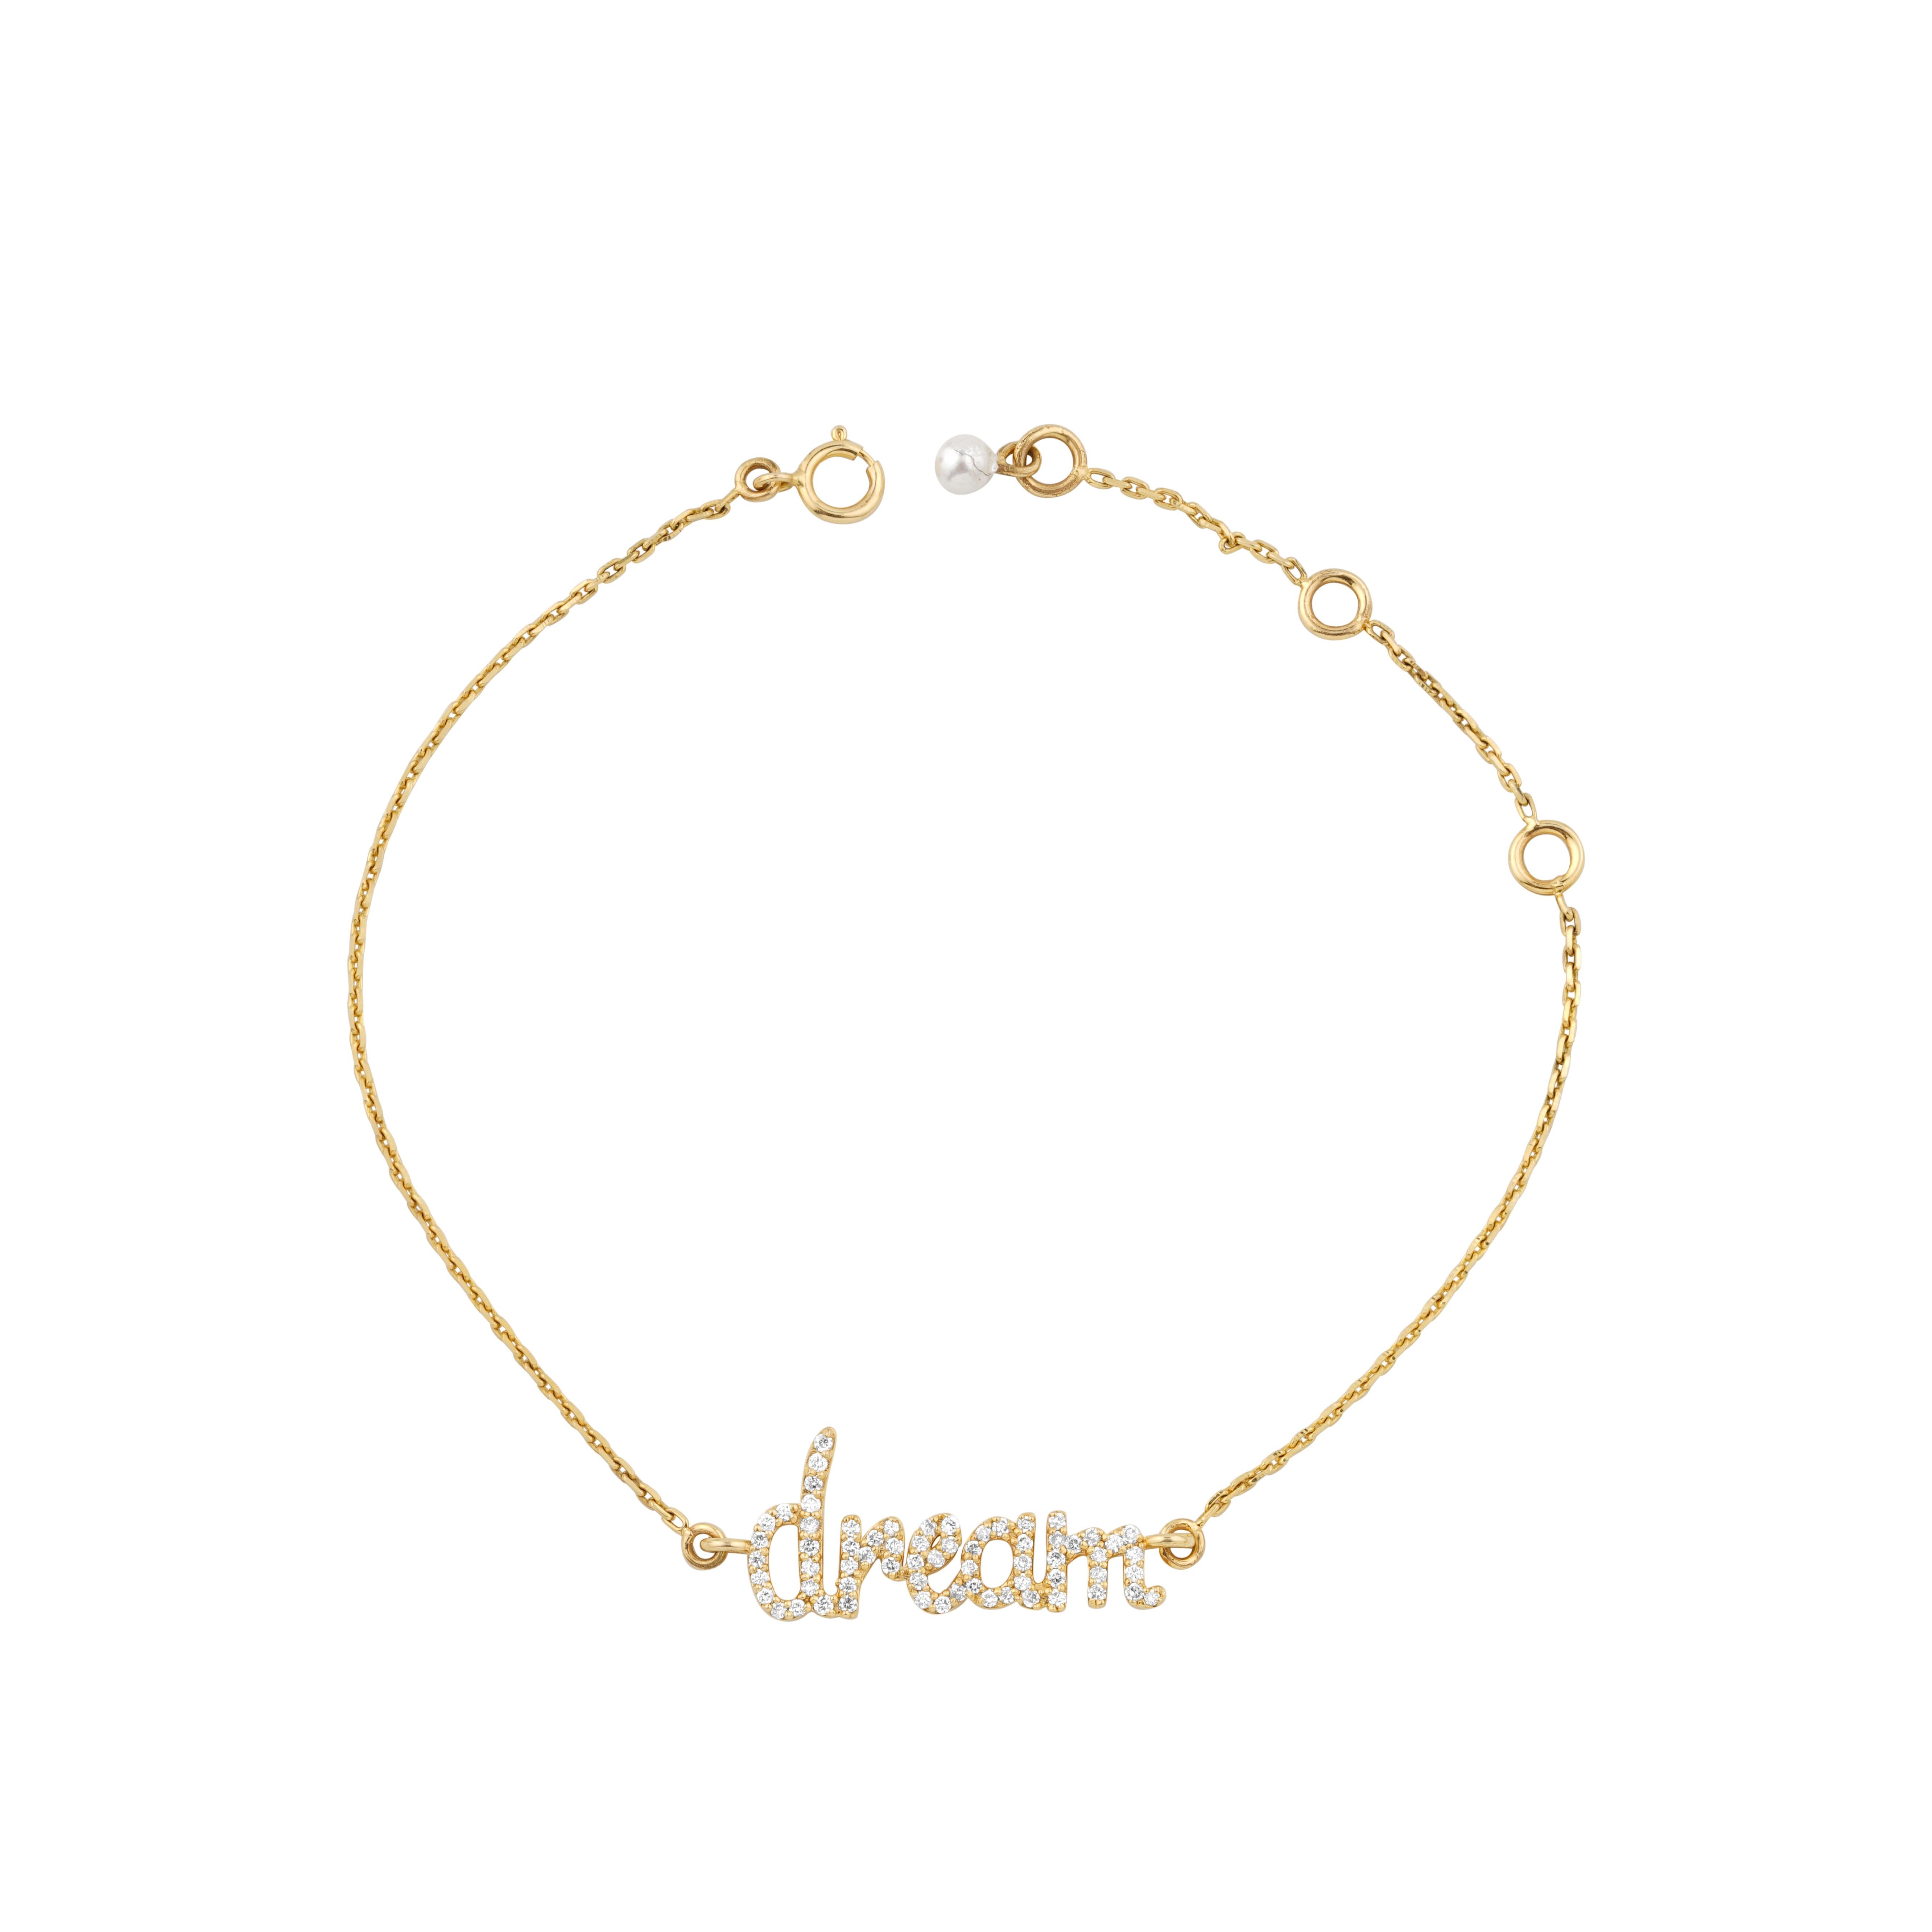 Diamond Dream Charm Bracelet features a delicate gold-tone bracelet with the word 